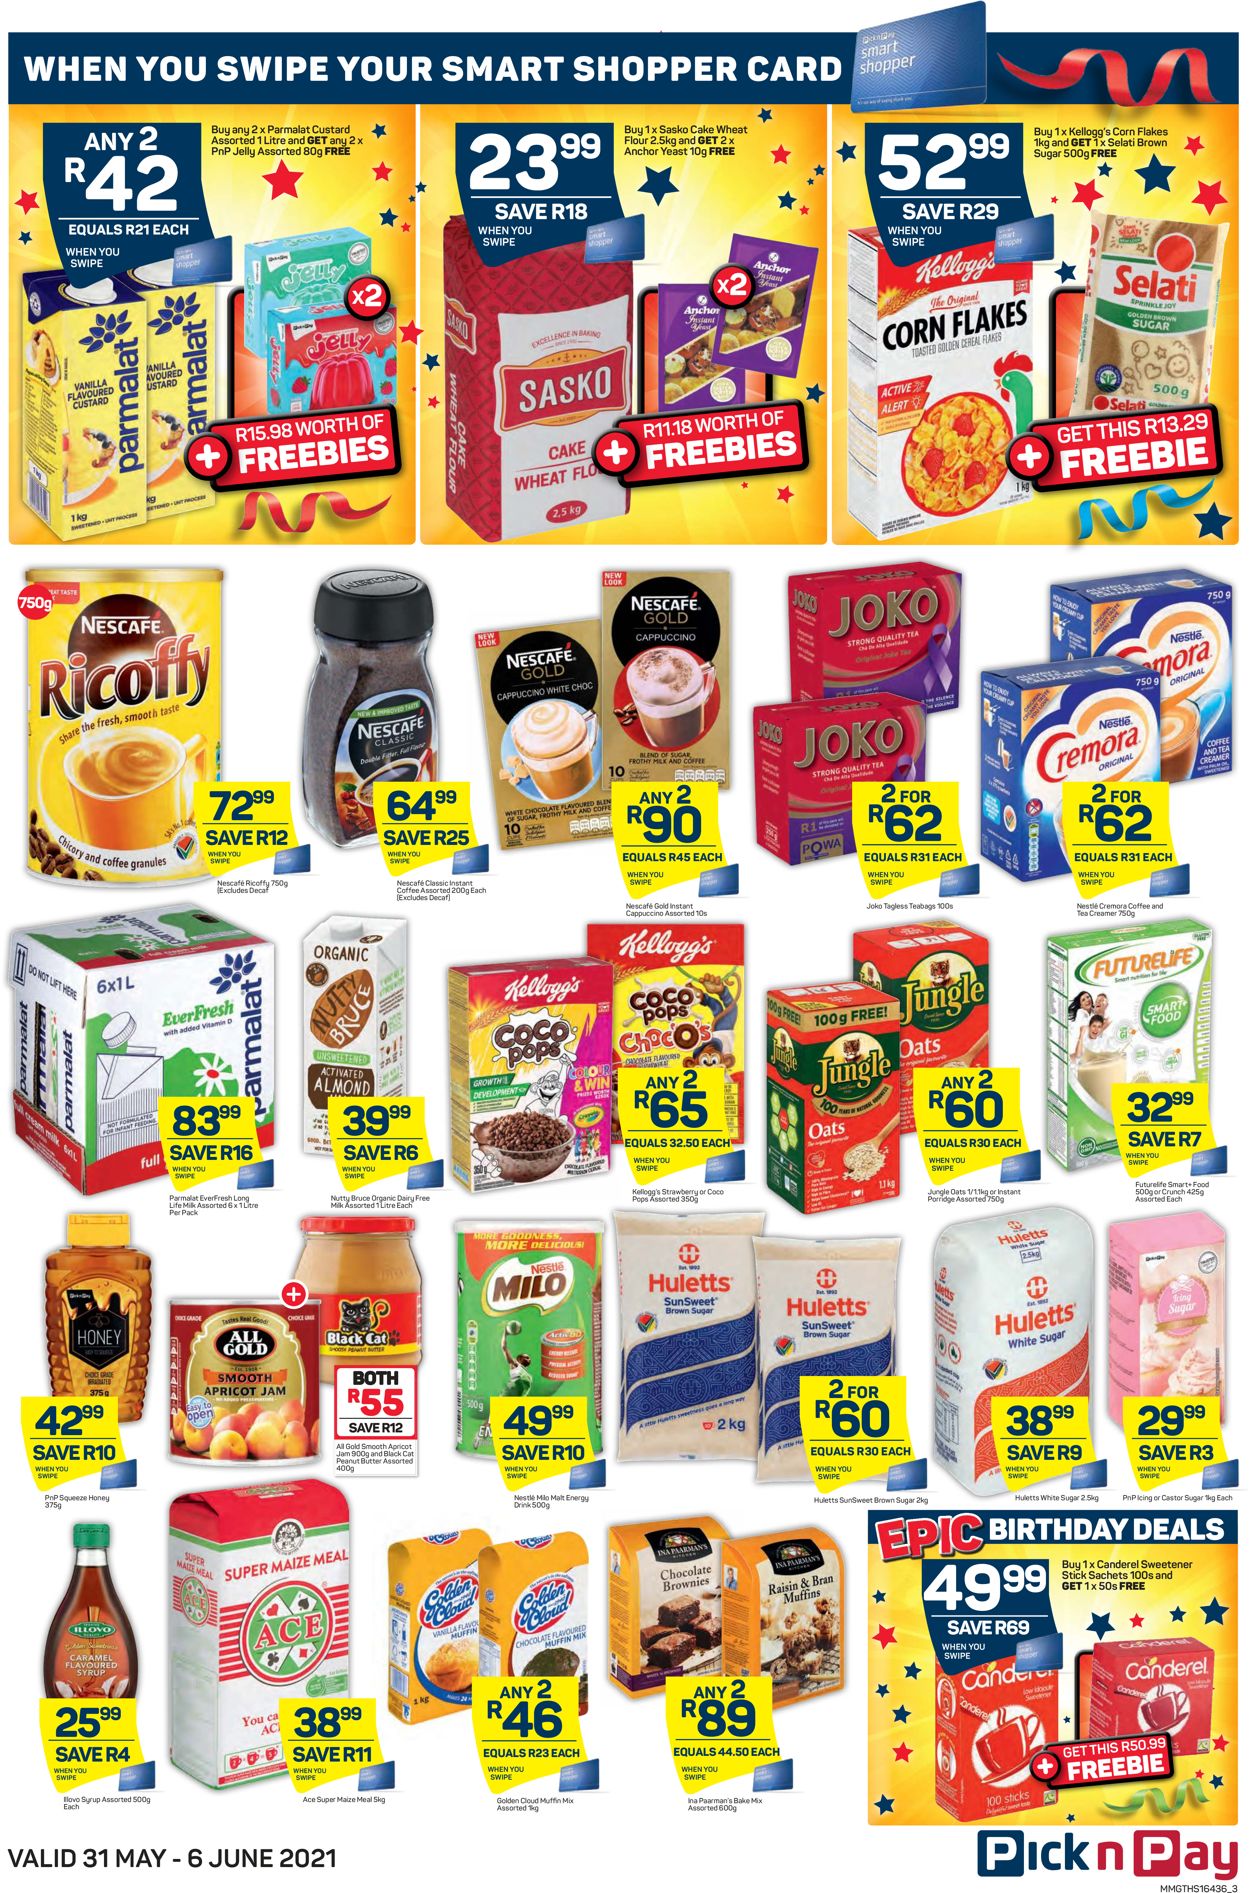 Pick n Pay Catalogue - 2021/05/31-2021/06/06 (Page 3)